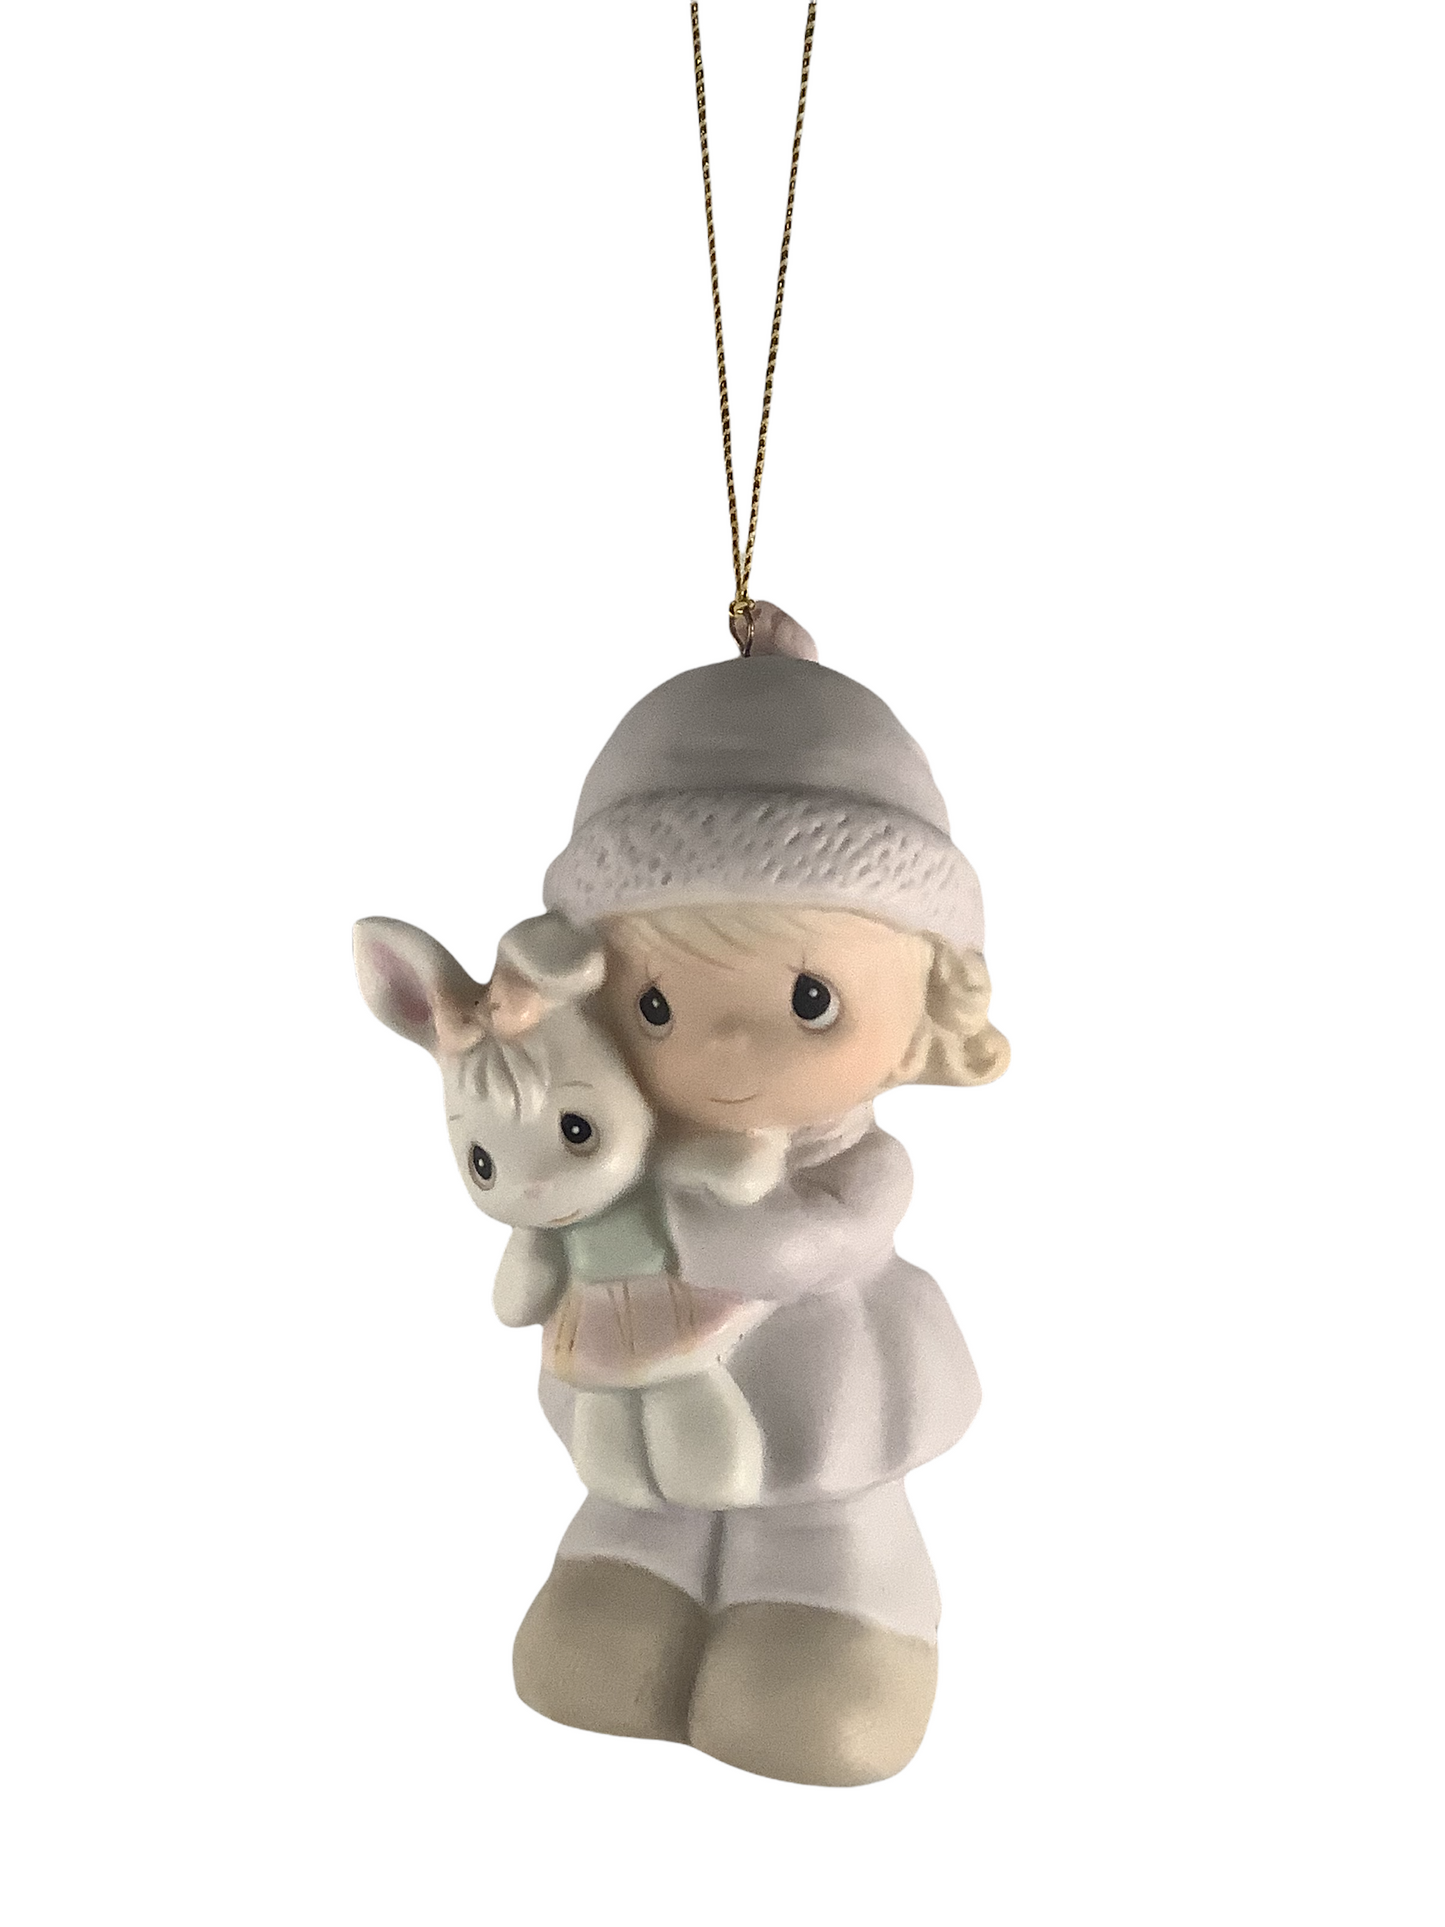 Good Friends Are For Always - Precious Moment Ornament